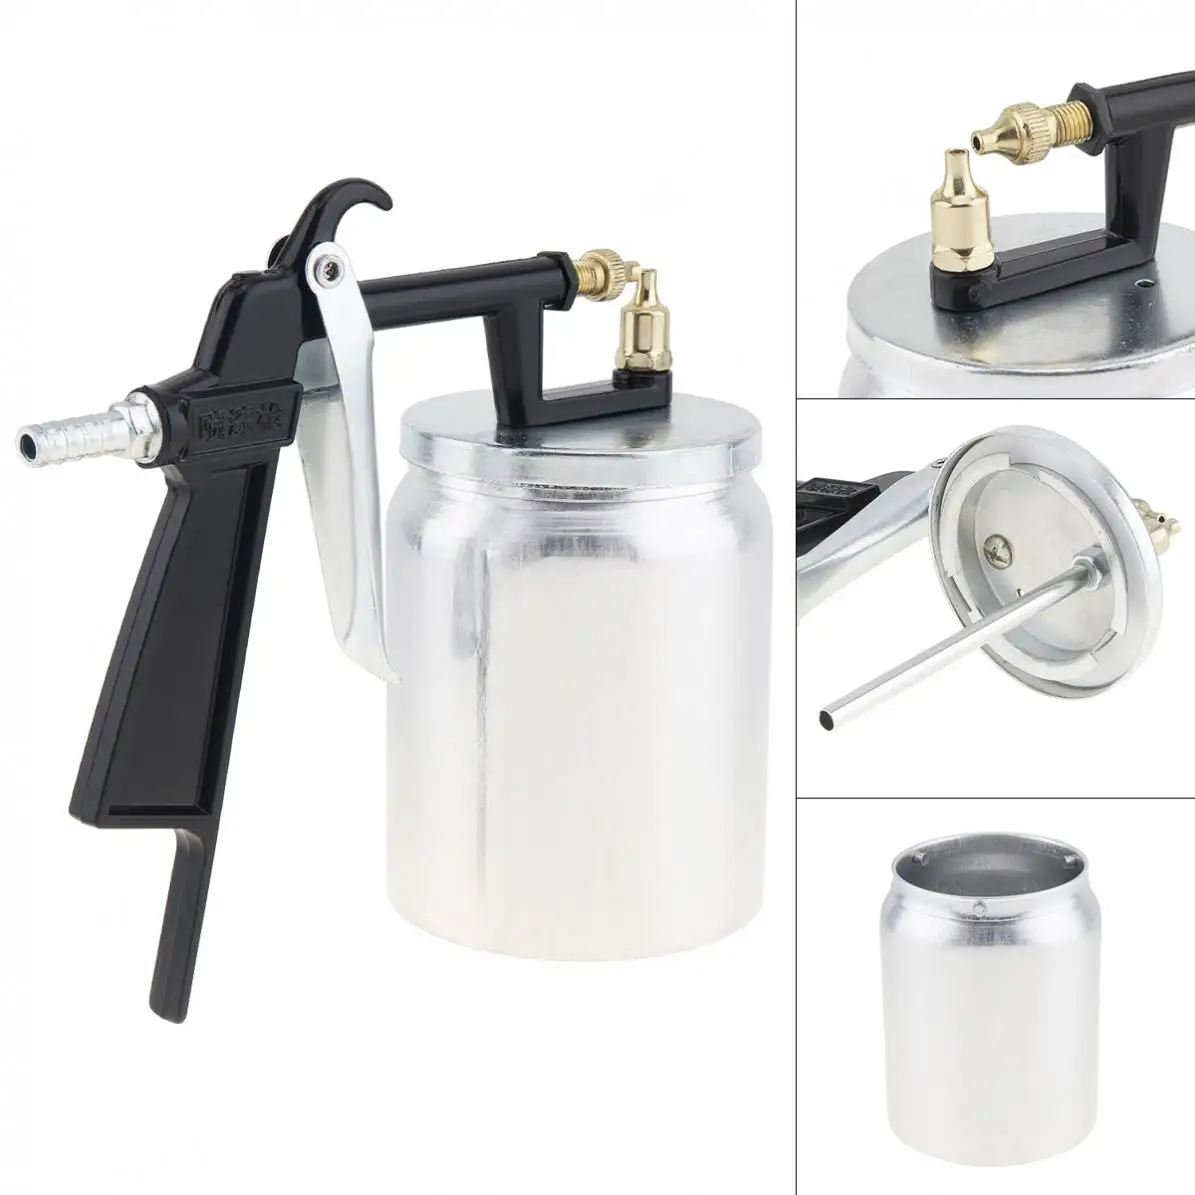 Spray Gun Mini Air Paint Spray Gun with 2.5mm Nozzle Caliber and Aluminum Pot for Furniture Leather Clothing Spray